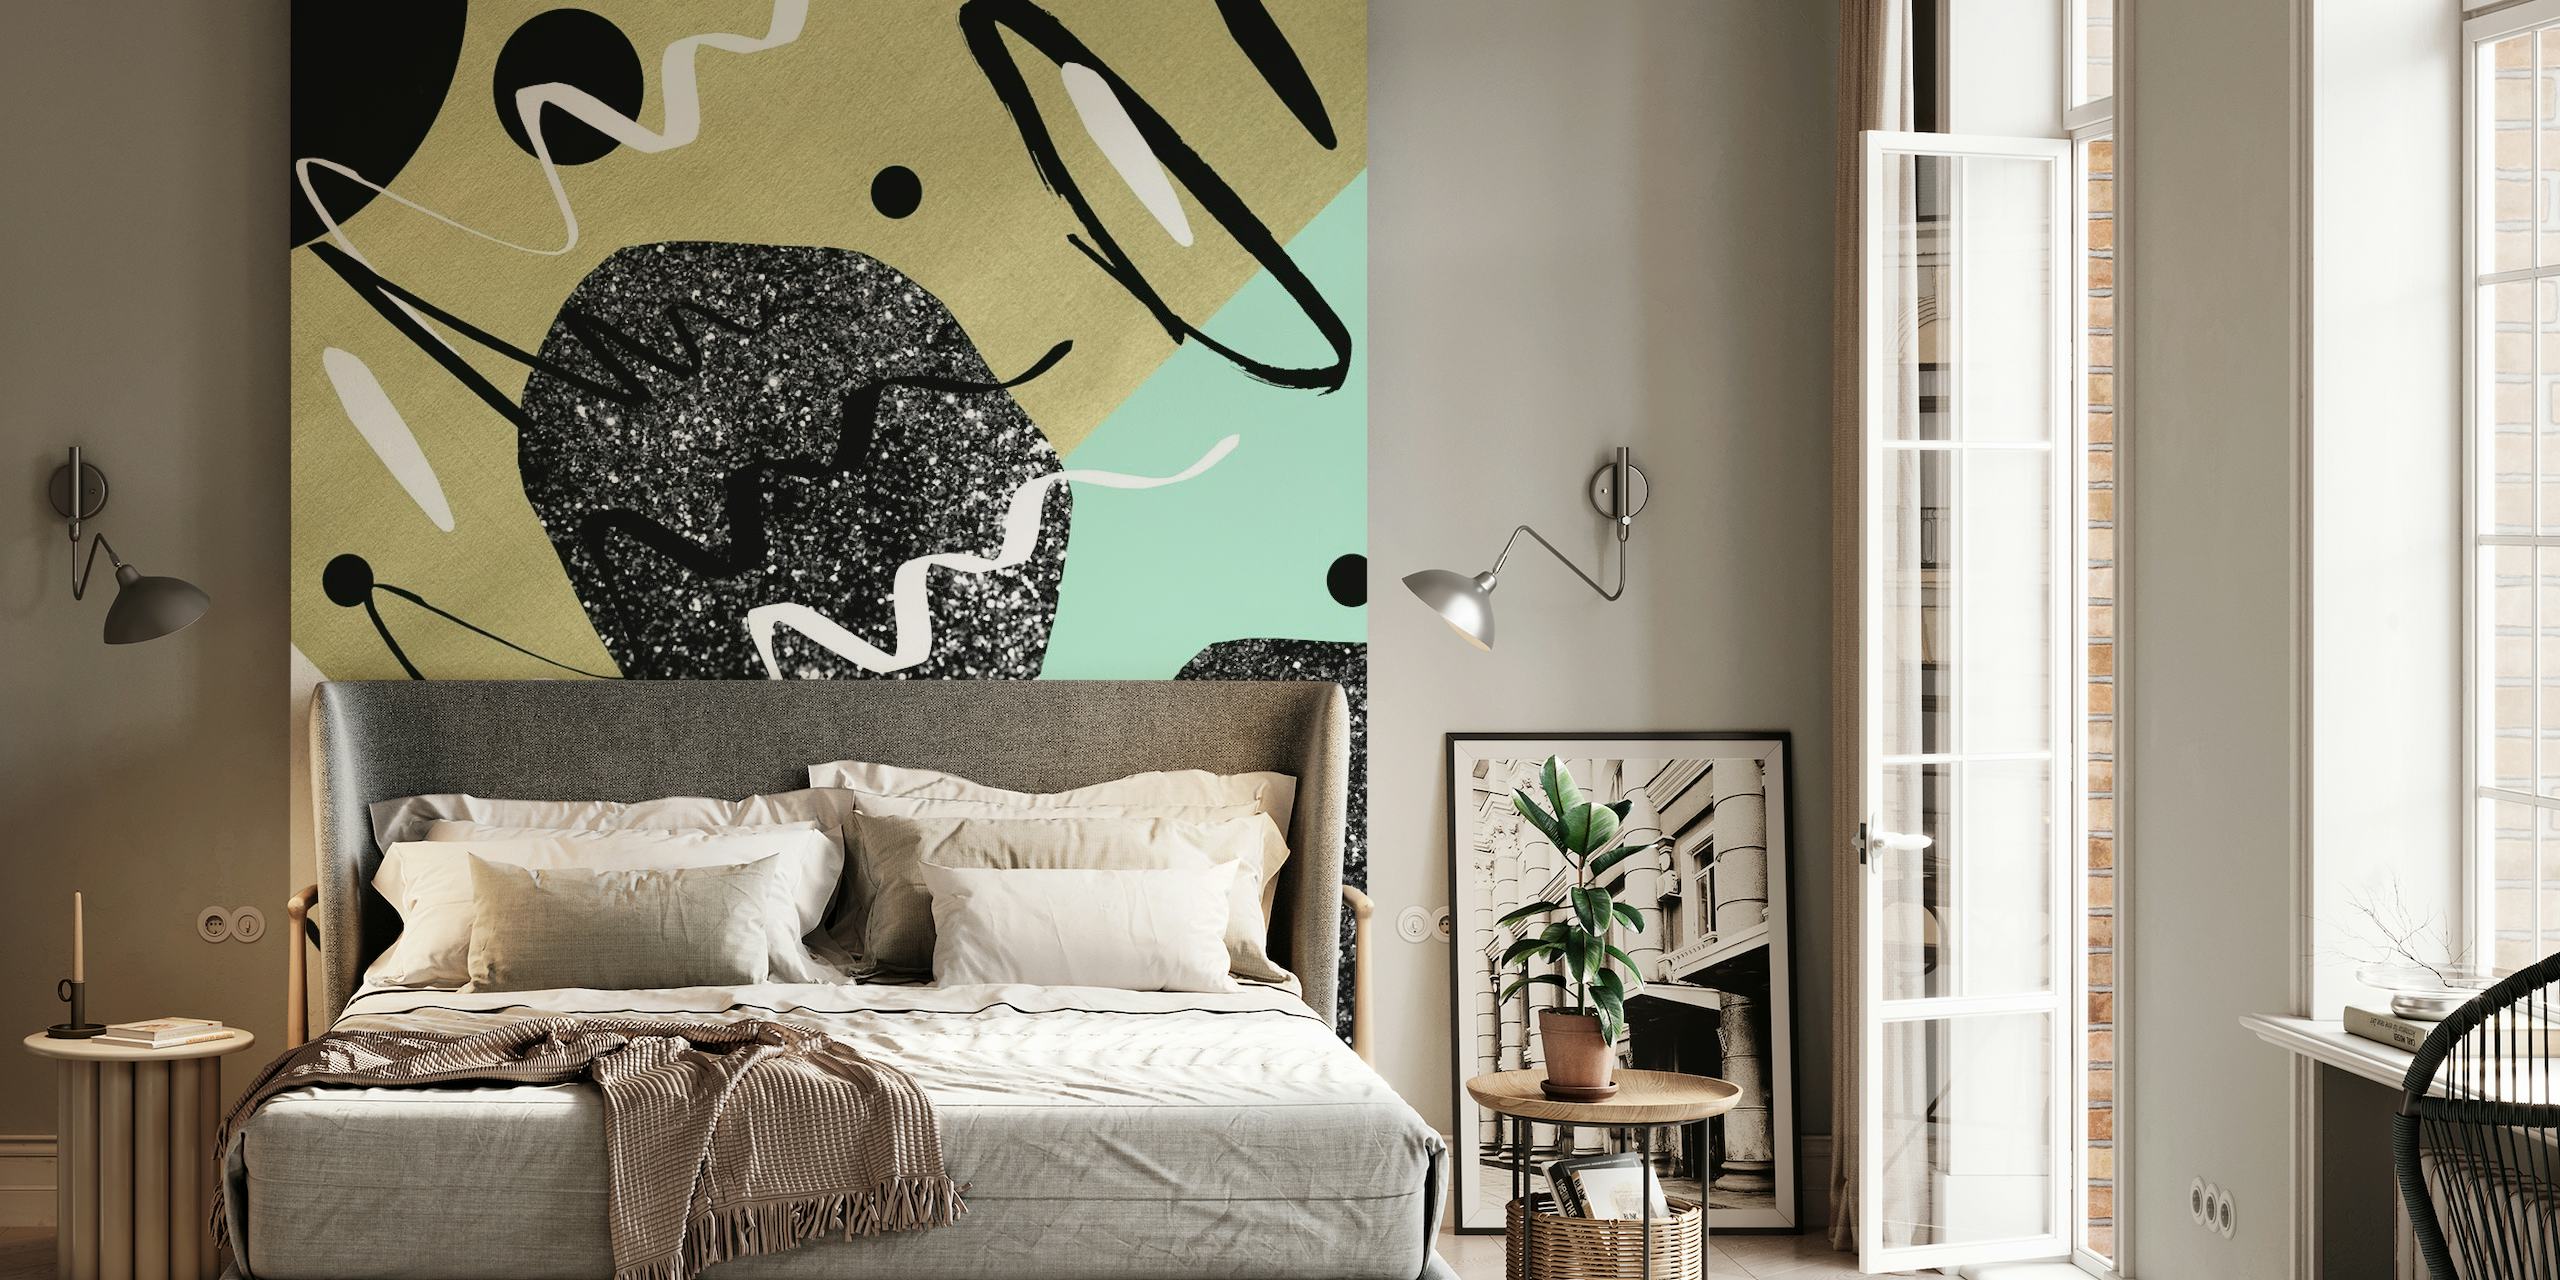 Gold Mint Black Abstract 1 wall mural featuring geometric shapes and lines in mint green, gold, and black.